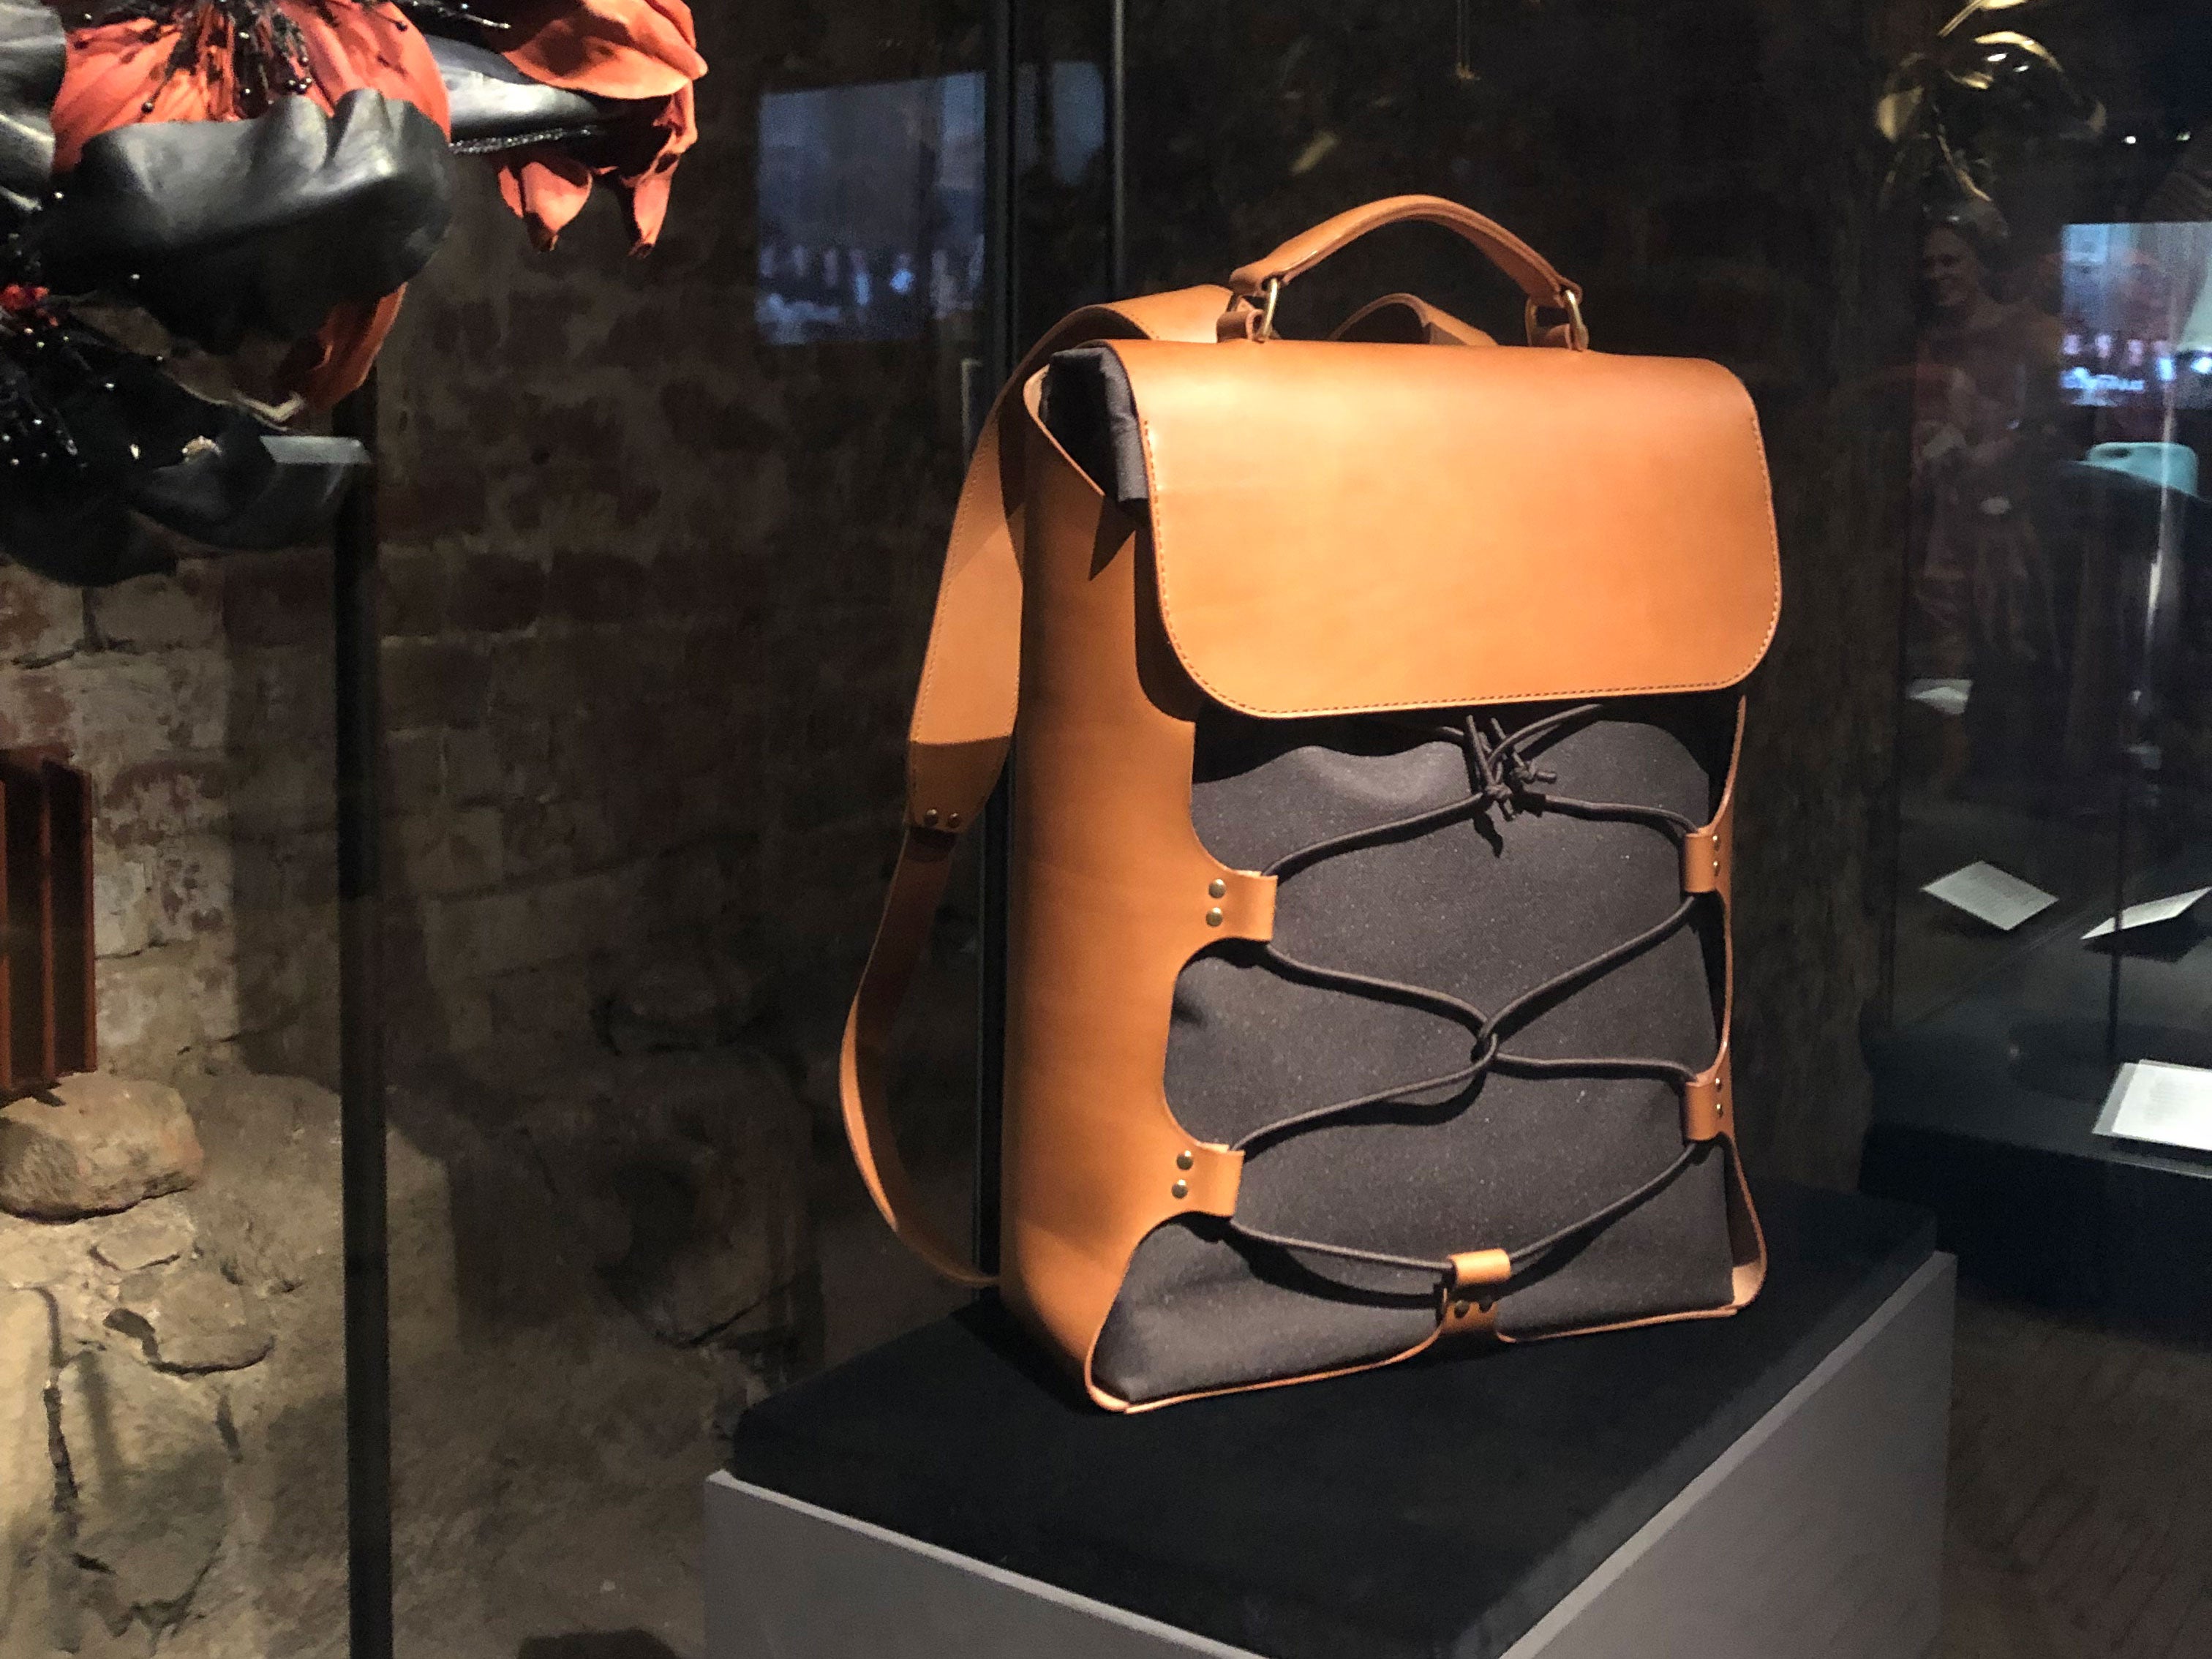 Our Backpack is on display at Koldinghus